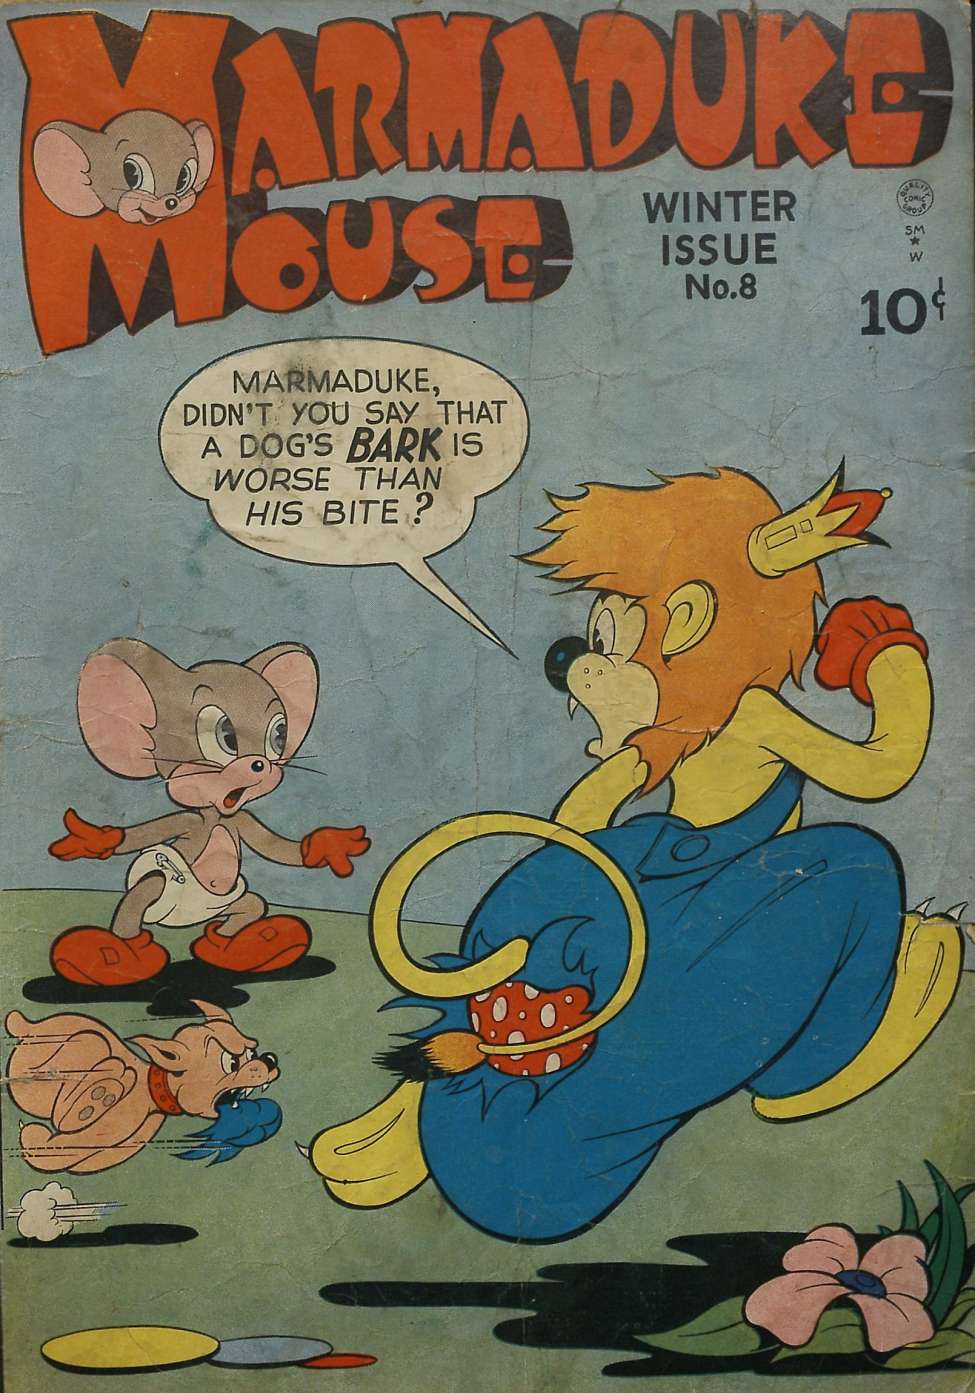 Book Cover For Marmaduke Mouse 8